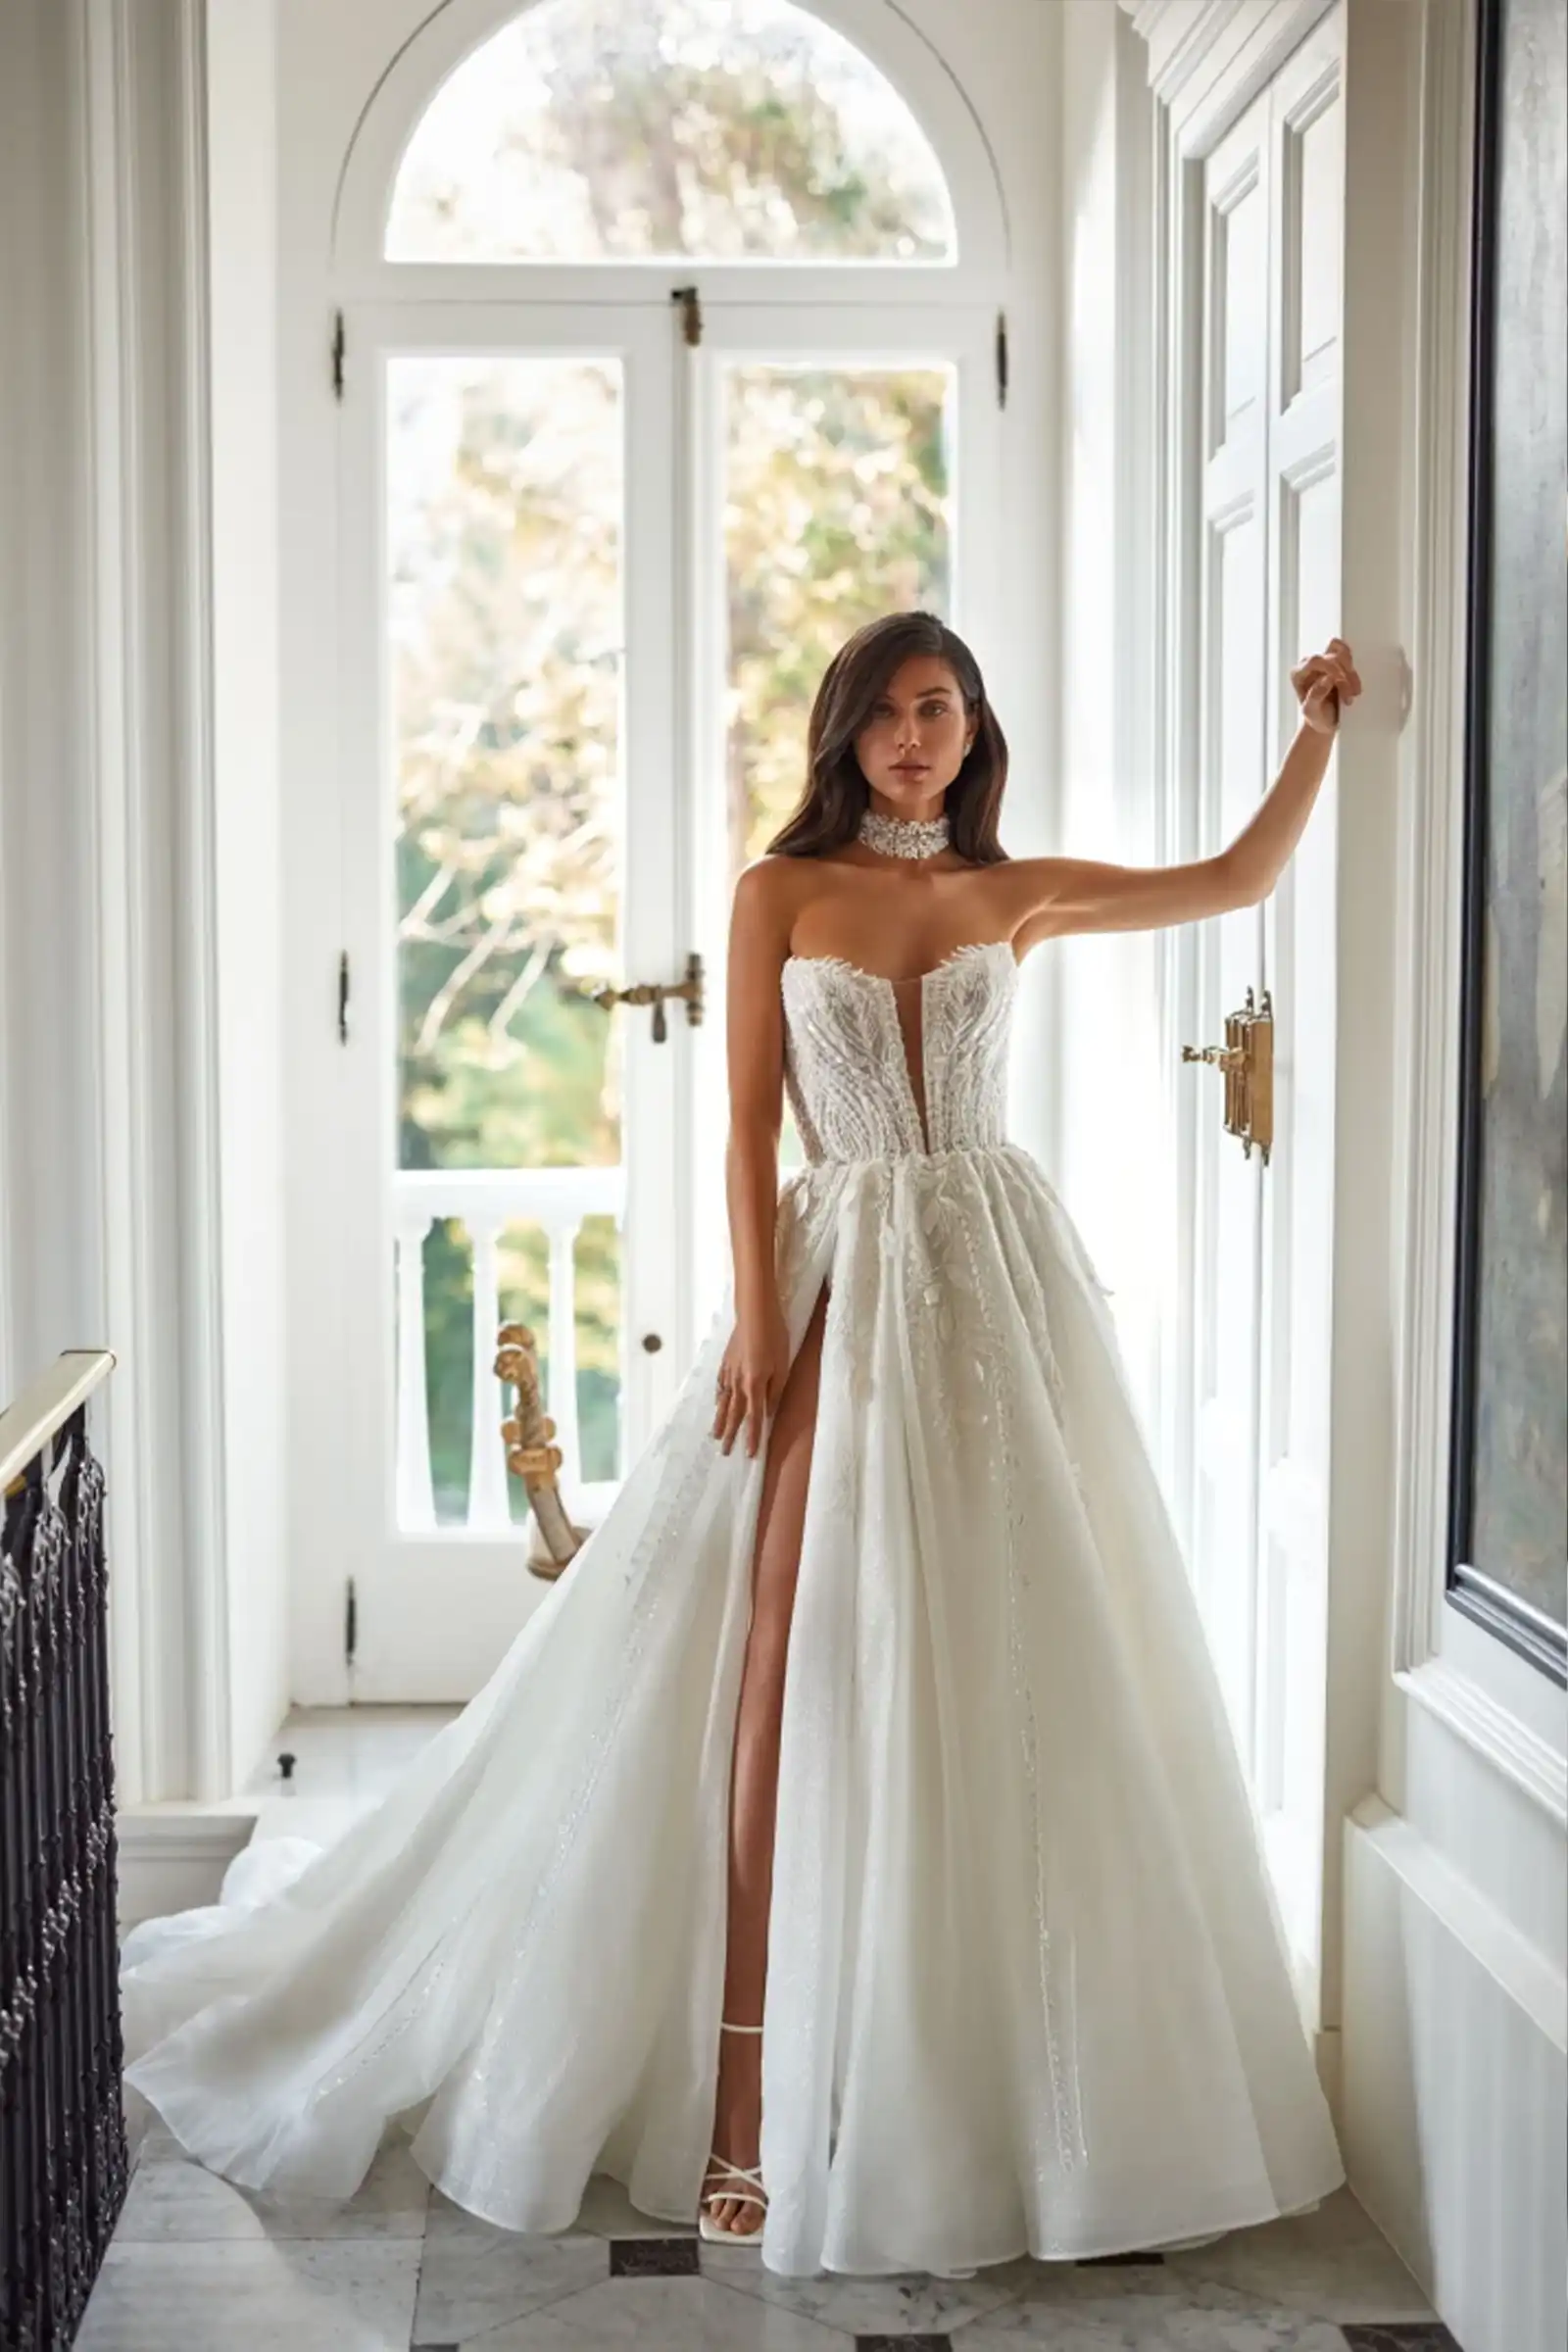 Featured image for “Brautkleid Abrielle”